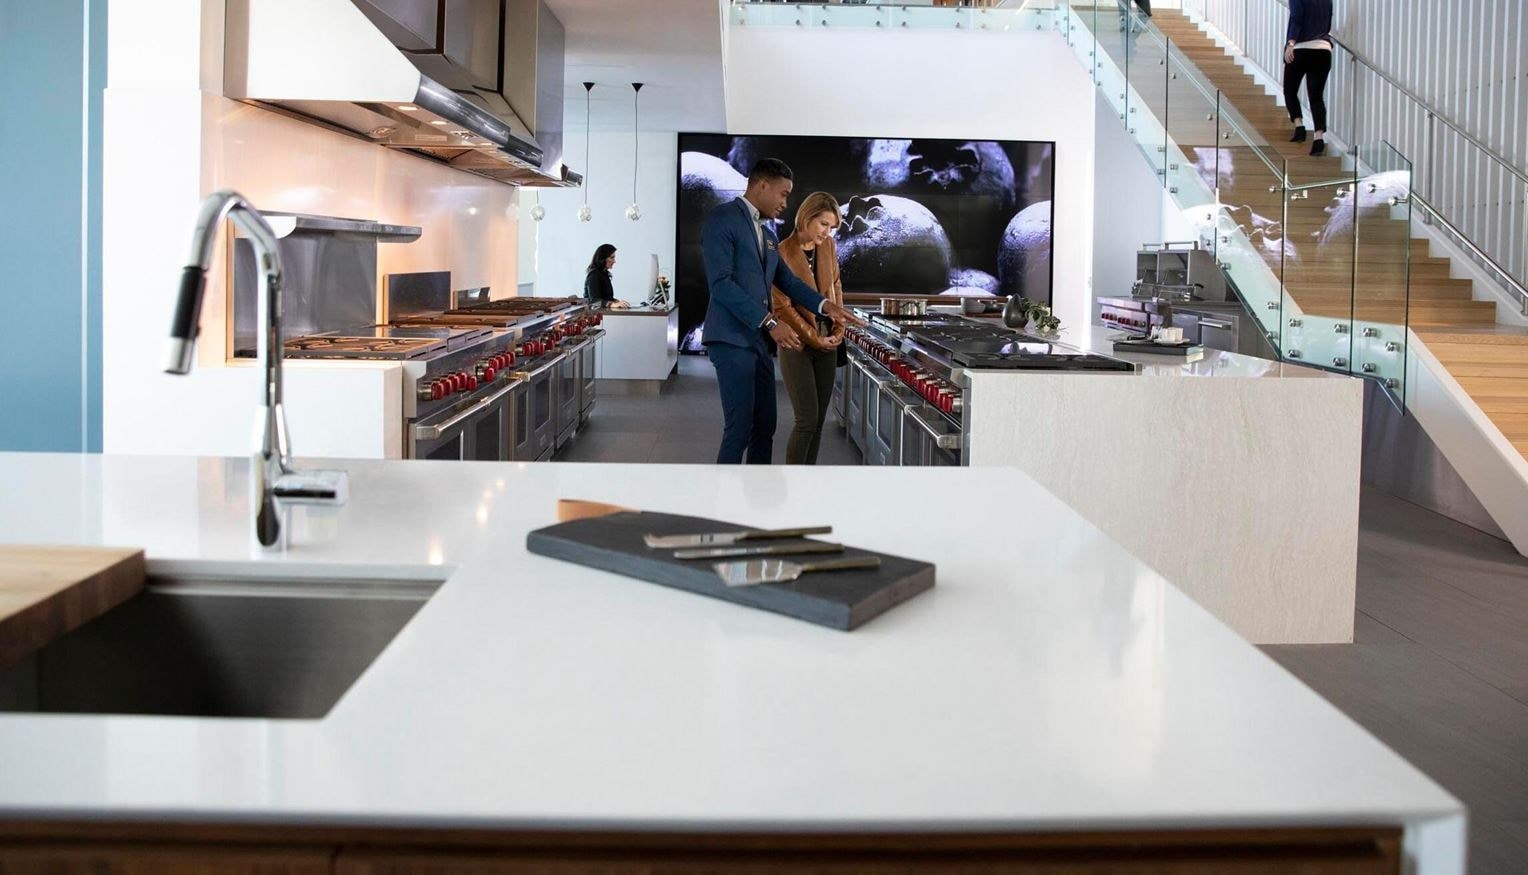 Experience the sights, sounds and smells of your next kitchen in the new Sub-Zero, Wolf and Cove Showroom in Denver, Colorado